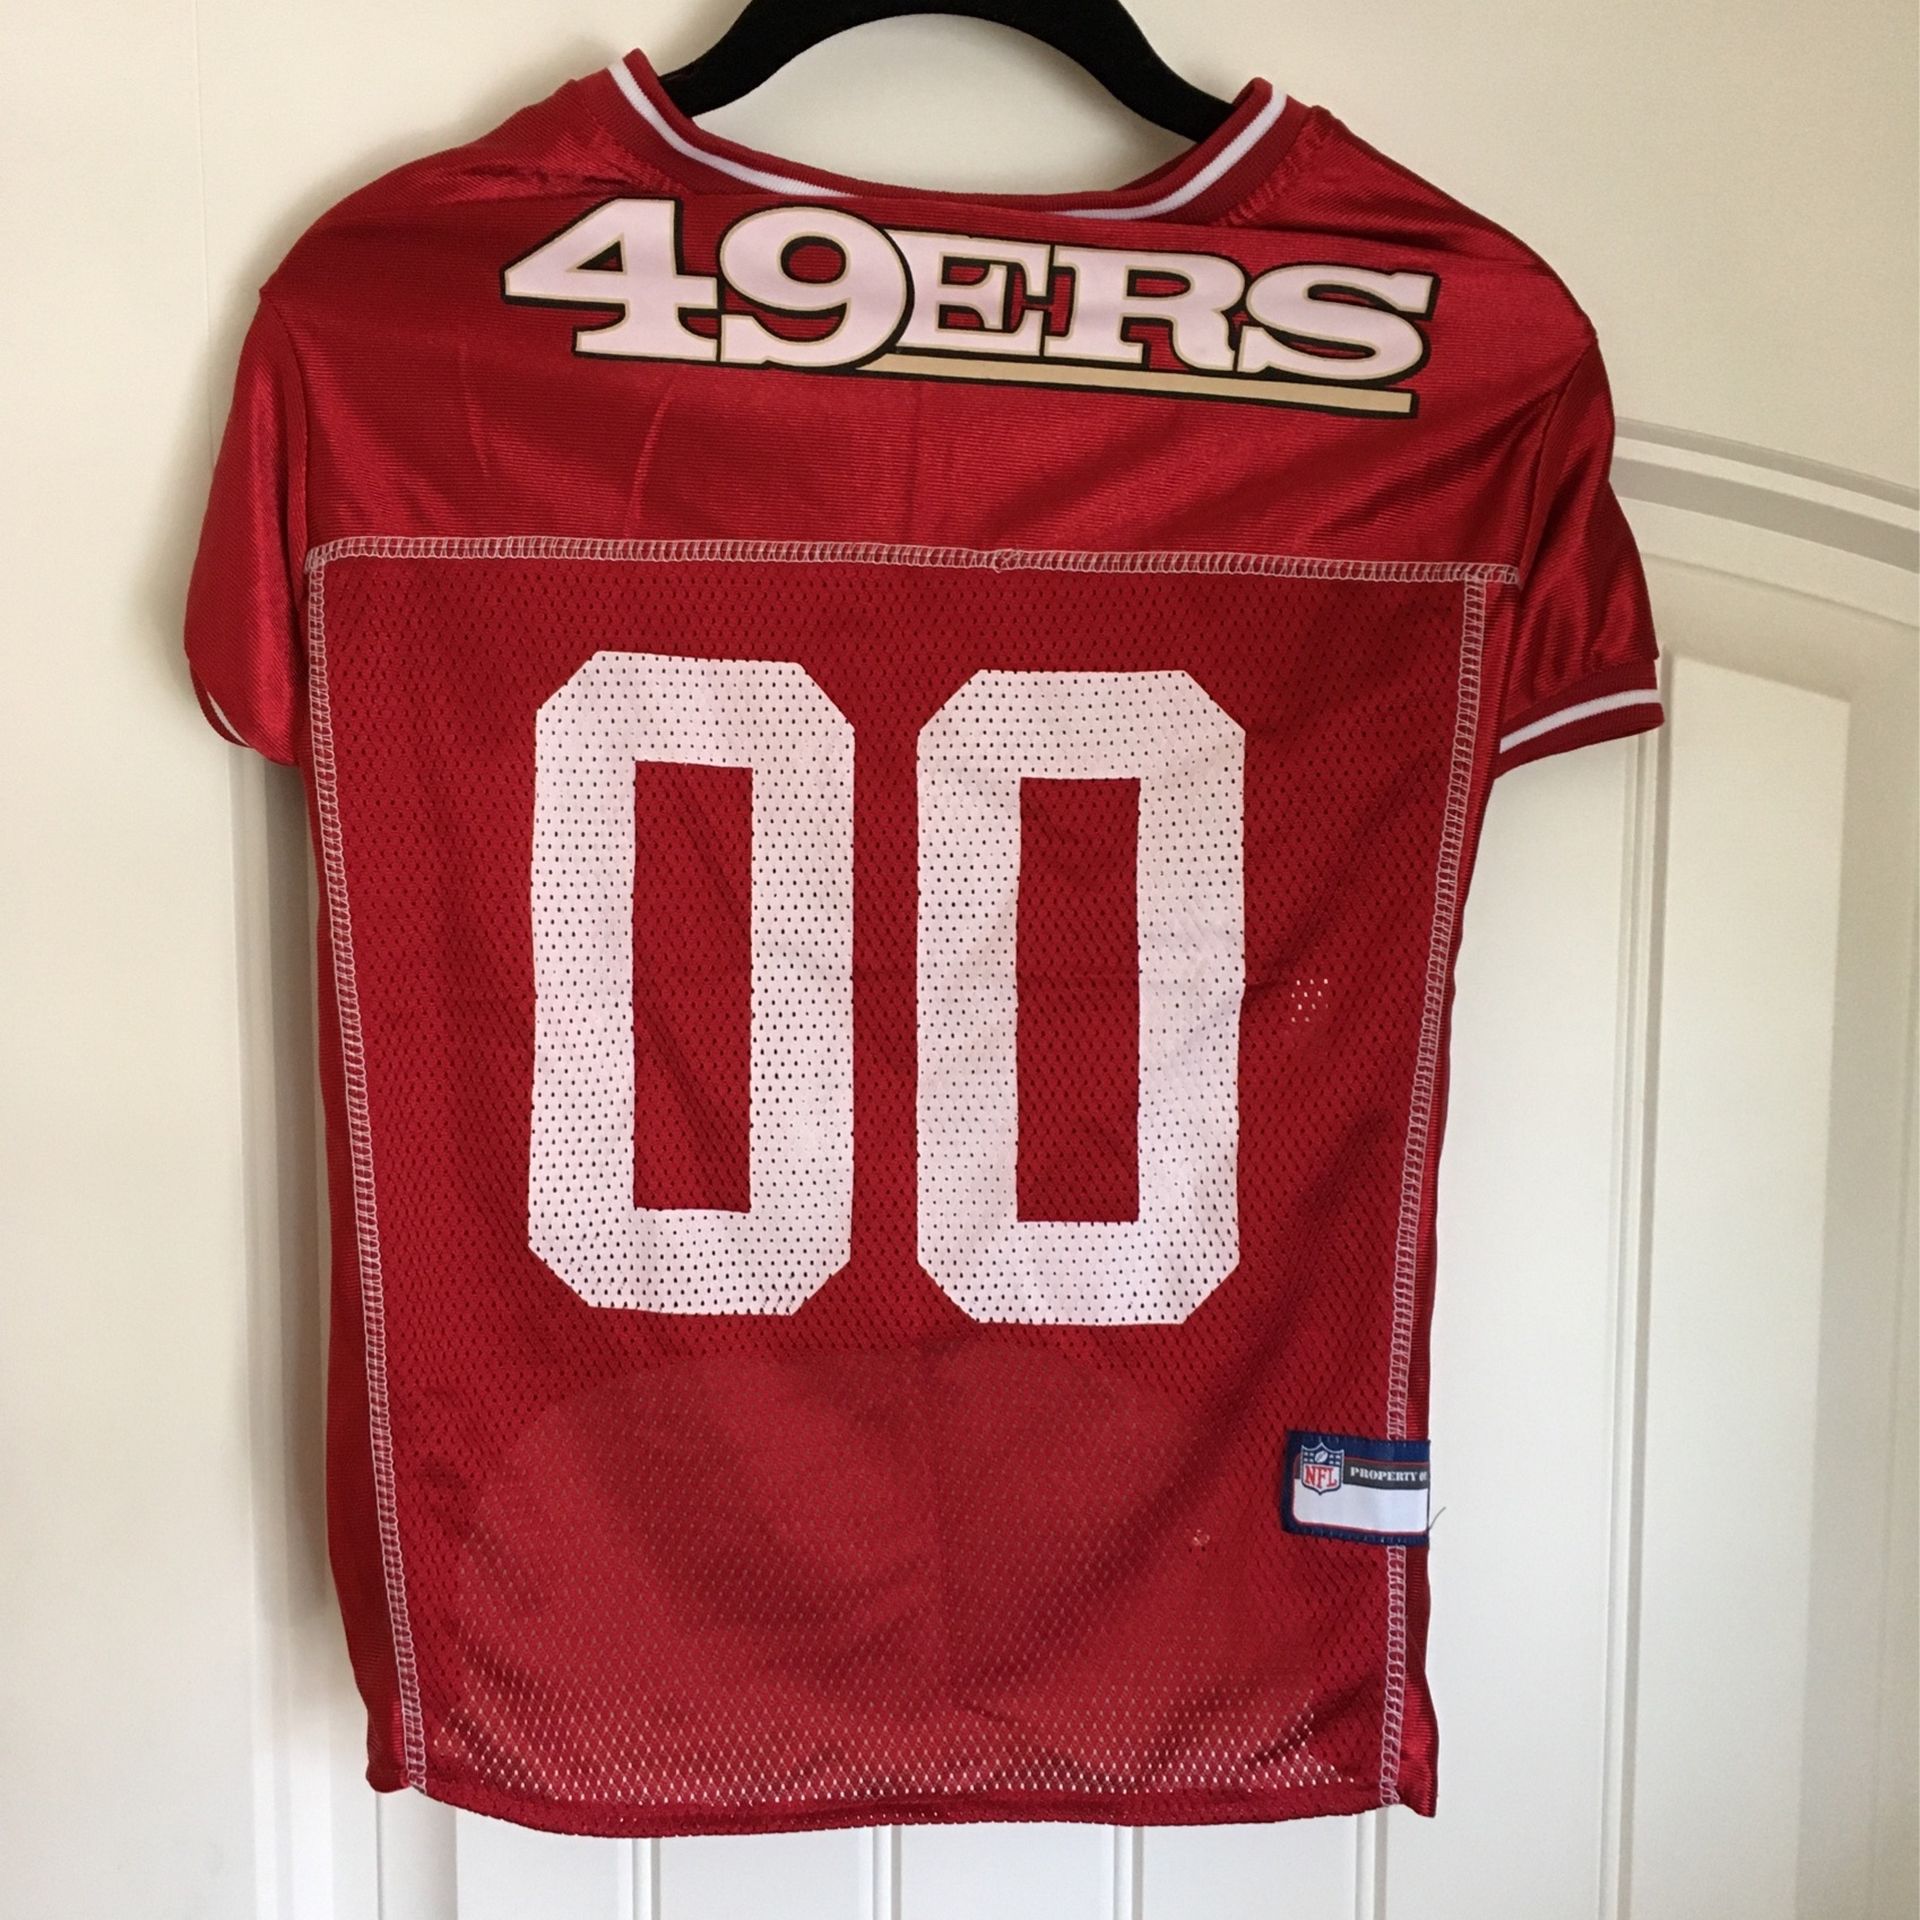 Dog’s 49ers Jersey #00